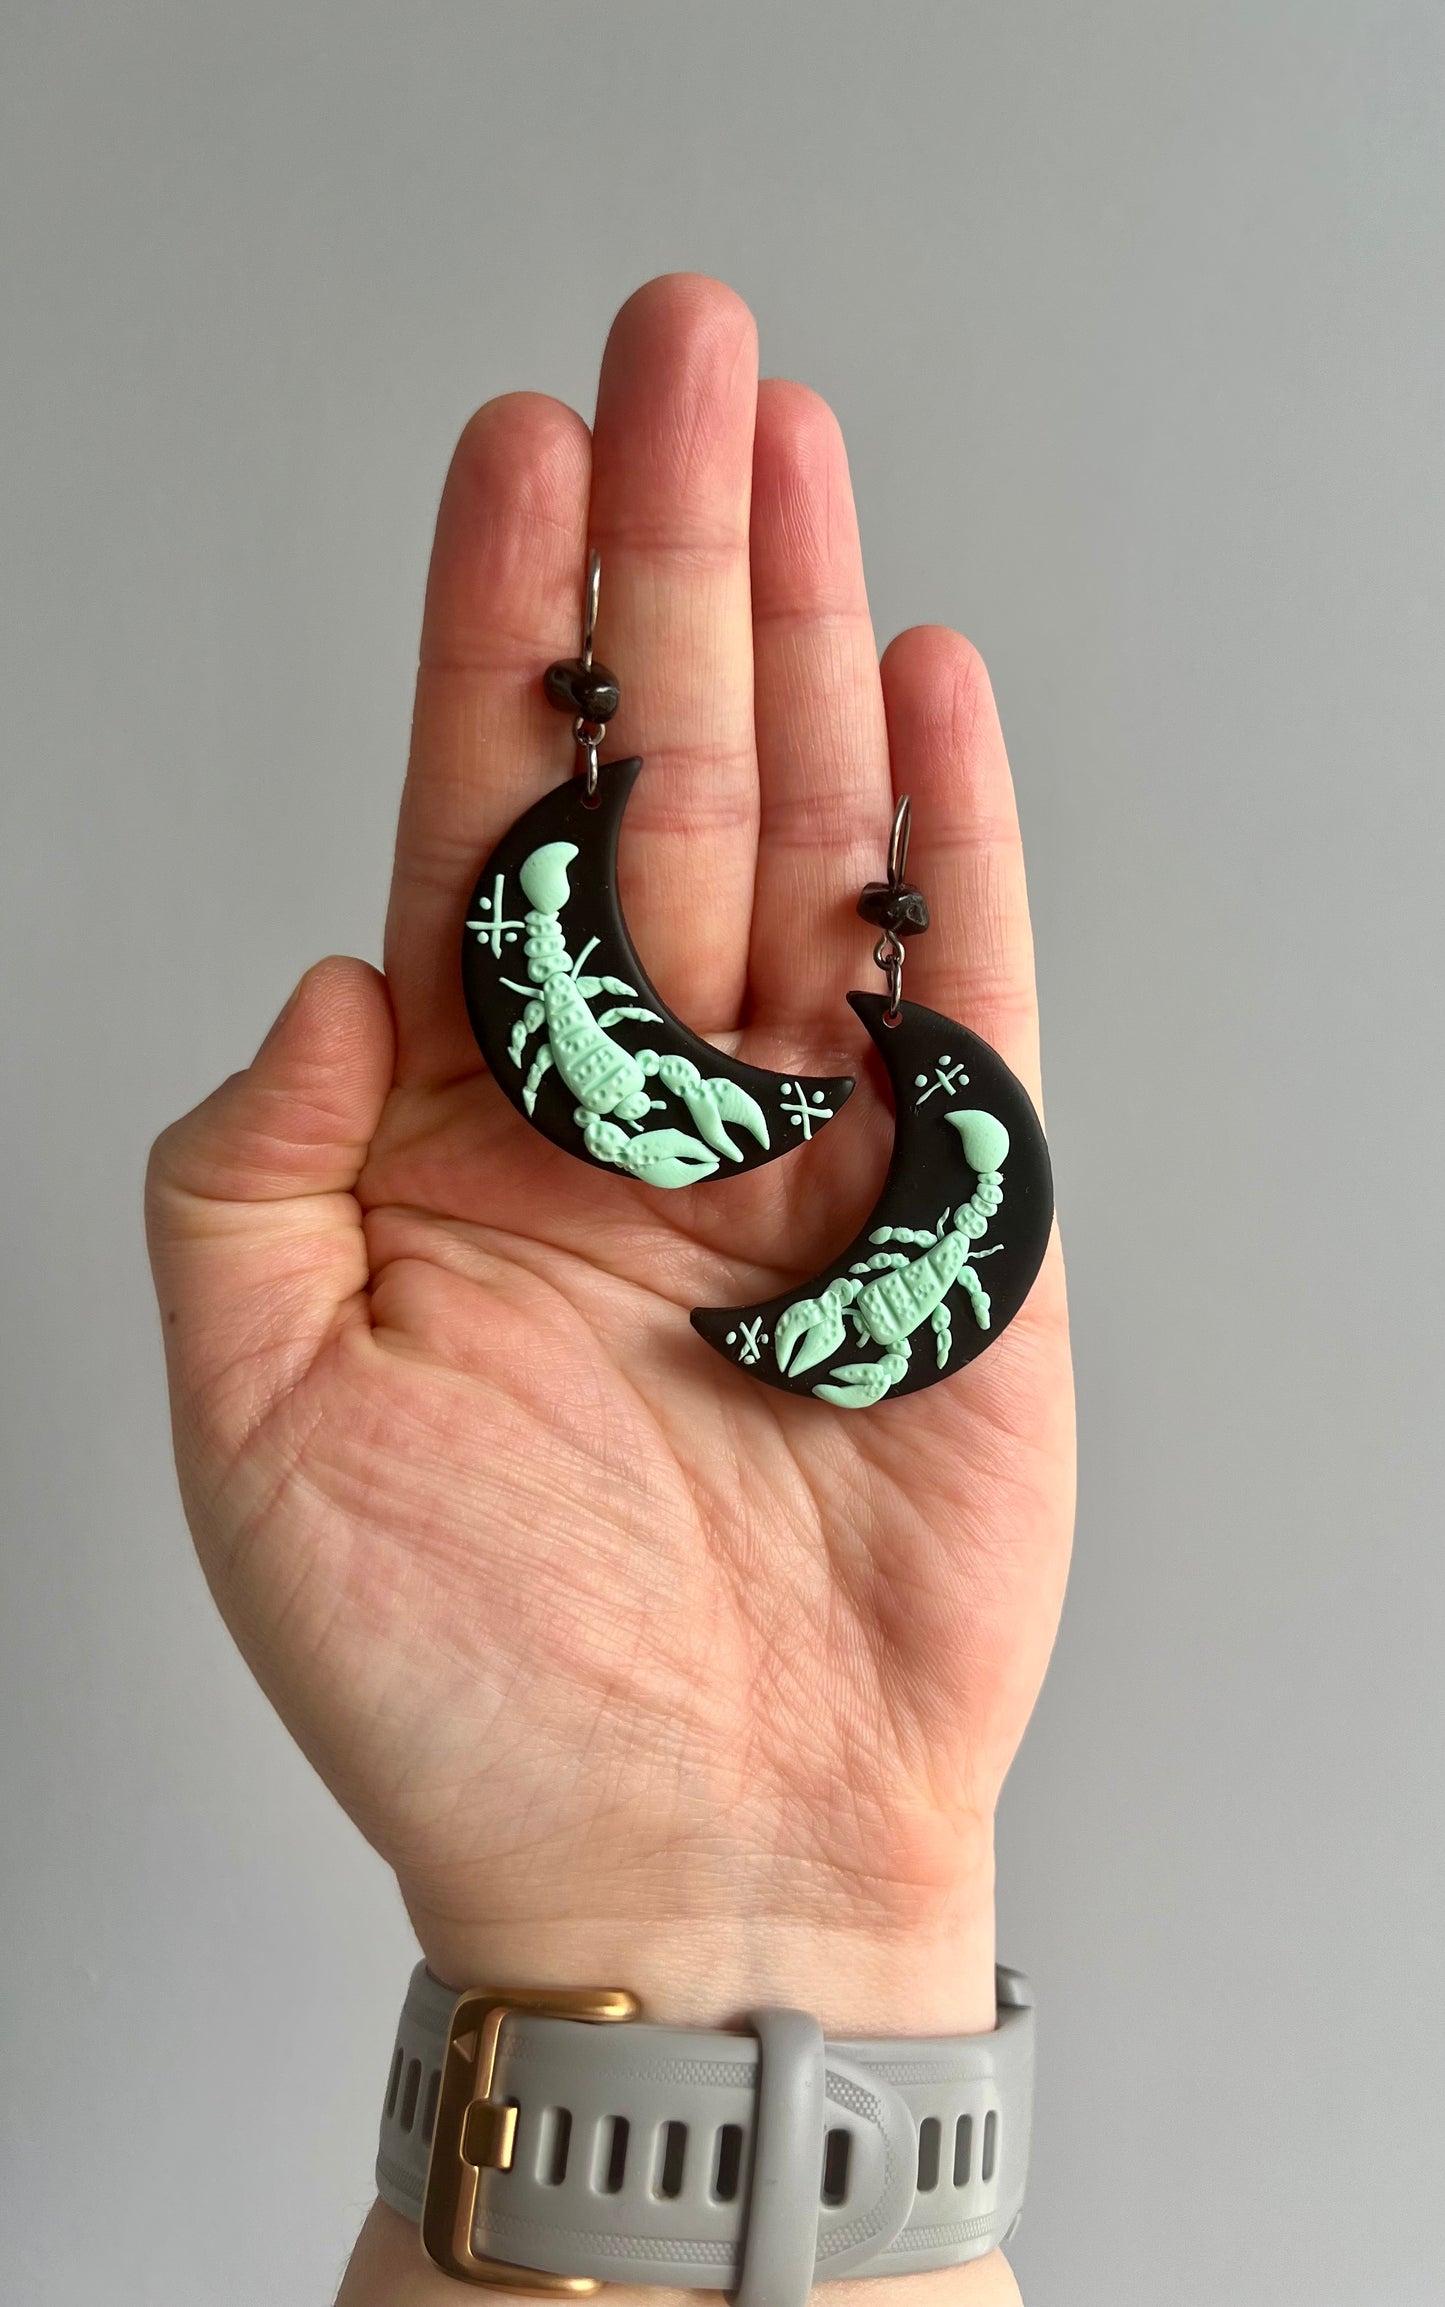 Handcrafted polymer clay Scorpio earrings, perfect for astrology lovers. These unique earrings feature intricate Scorpio zodiac sign designs, adding a touch of personality to any outfit. Shop now for a stylish accessory that celebrates your astrological sign!